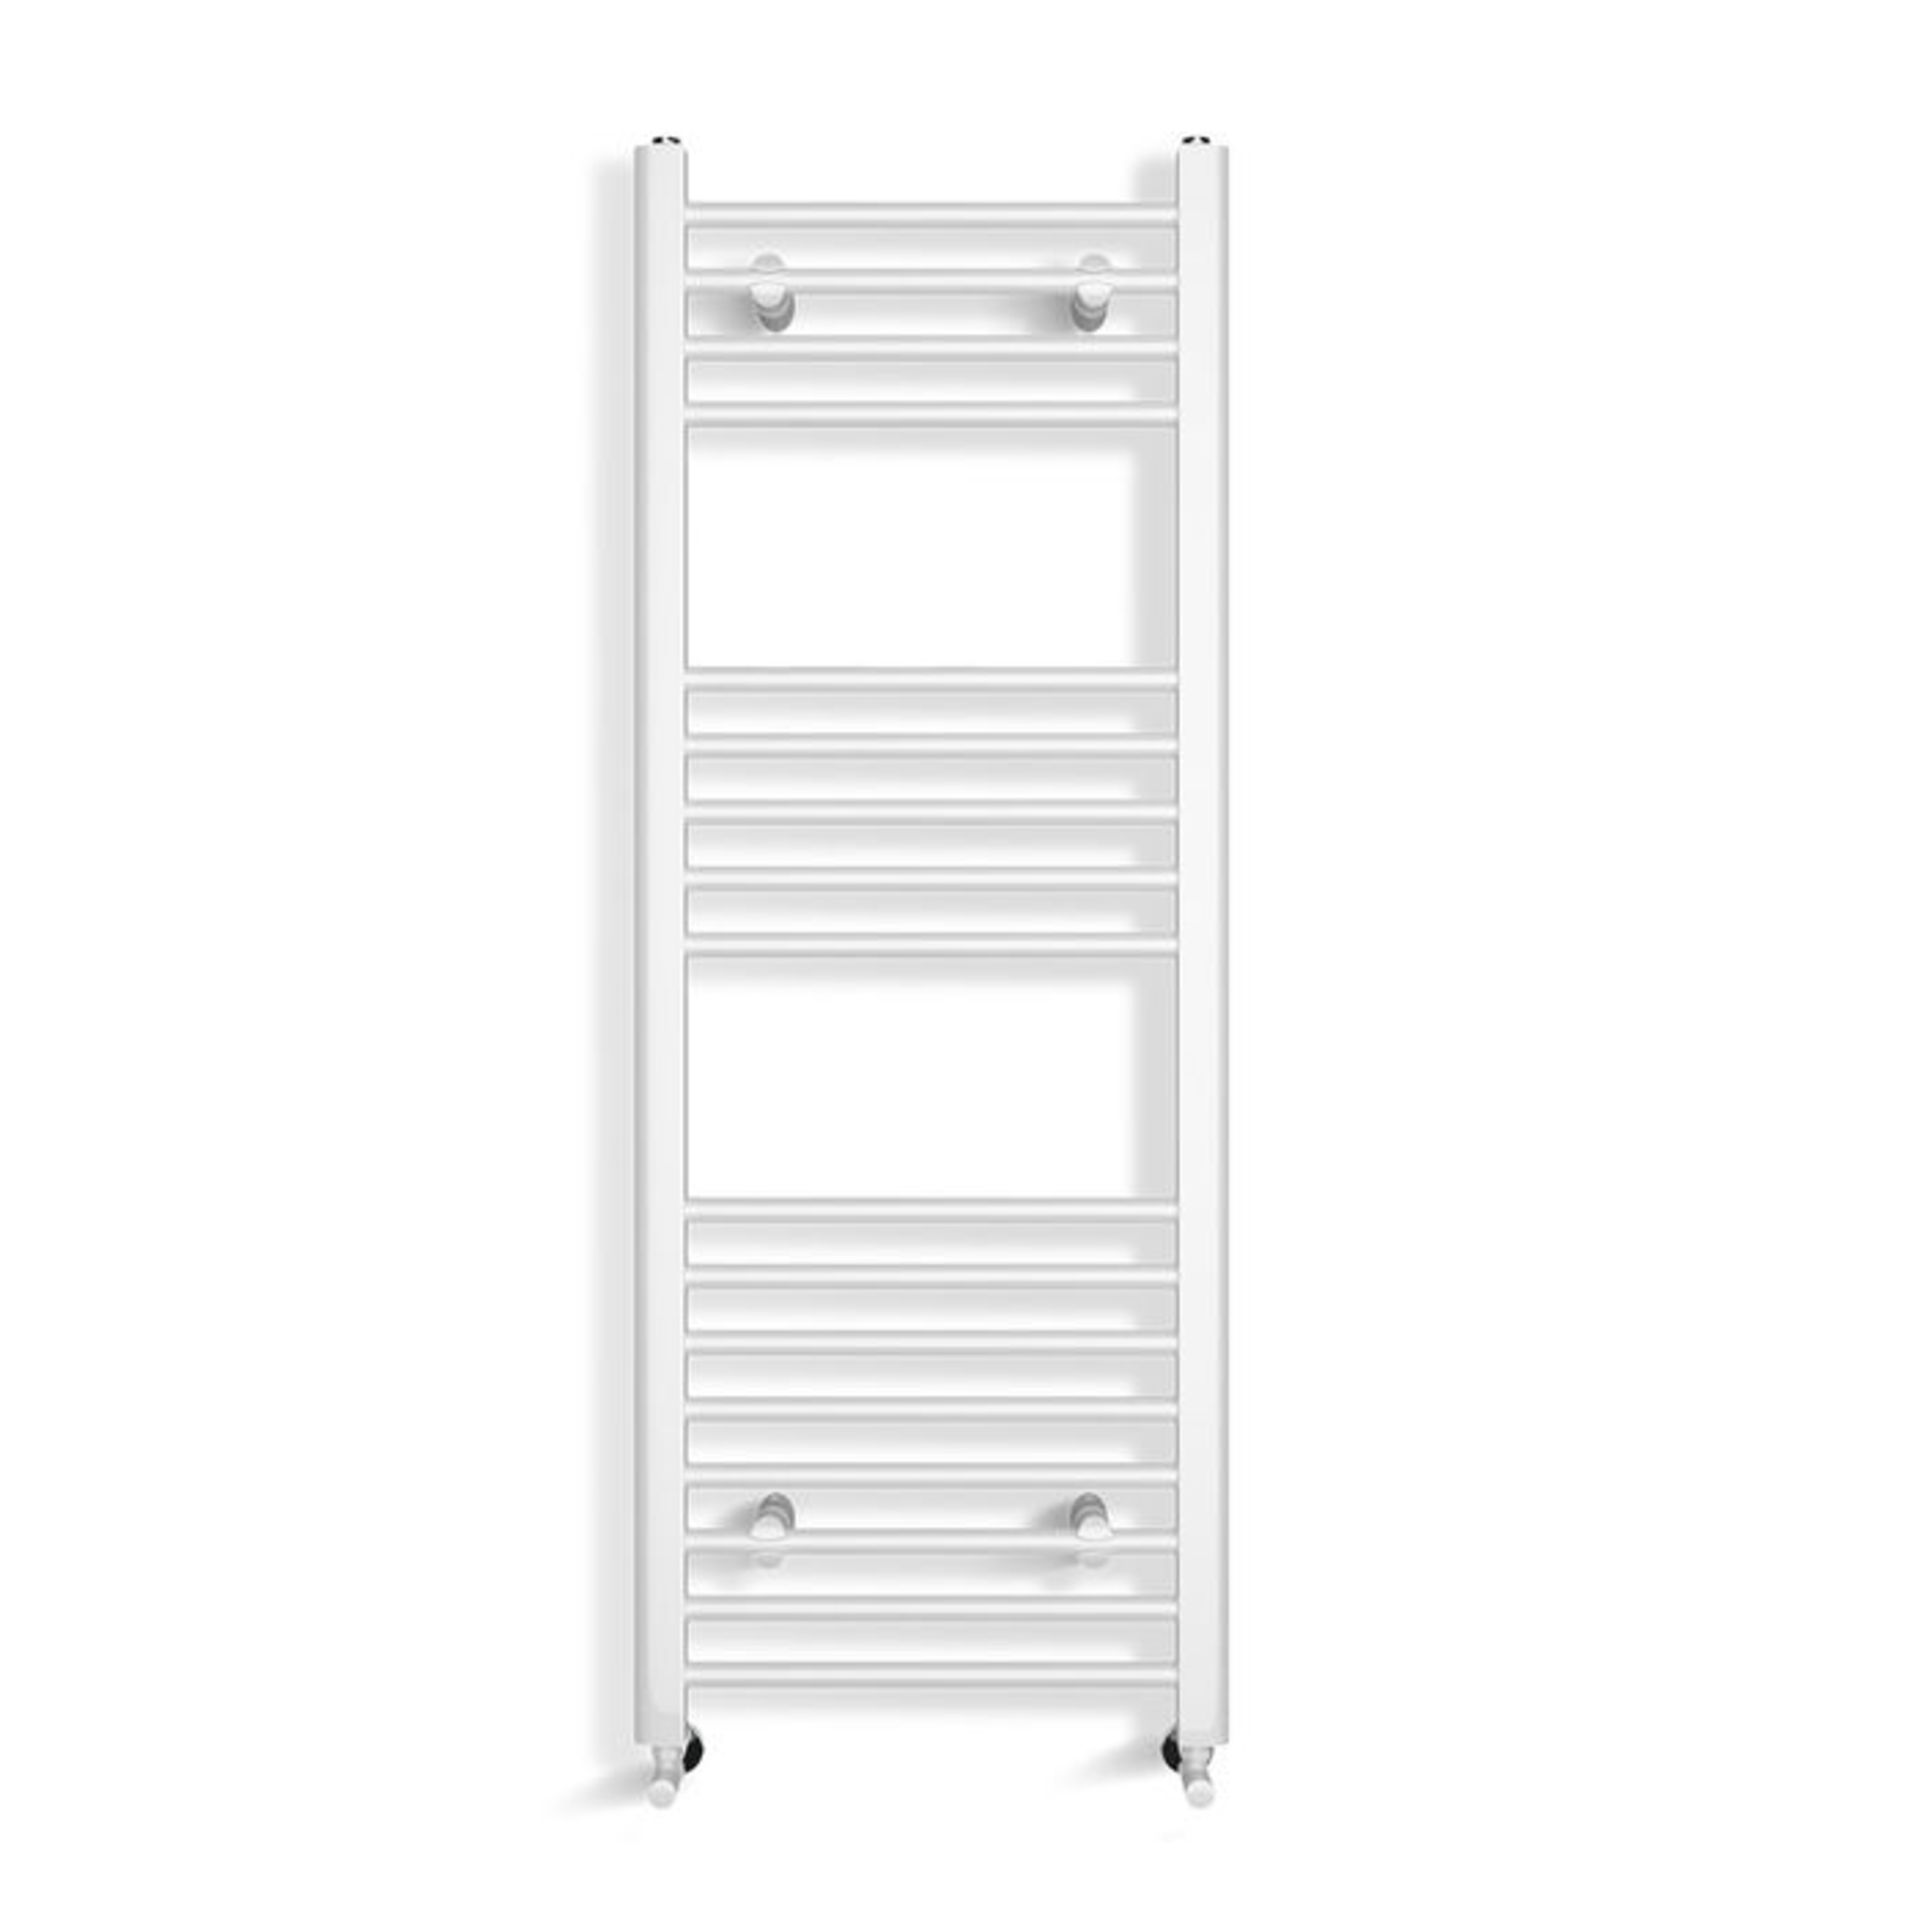 (LL126) 1100x500mm White Matt Heated Towel Radiator. RRP £129.99. Made from low carbon steel